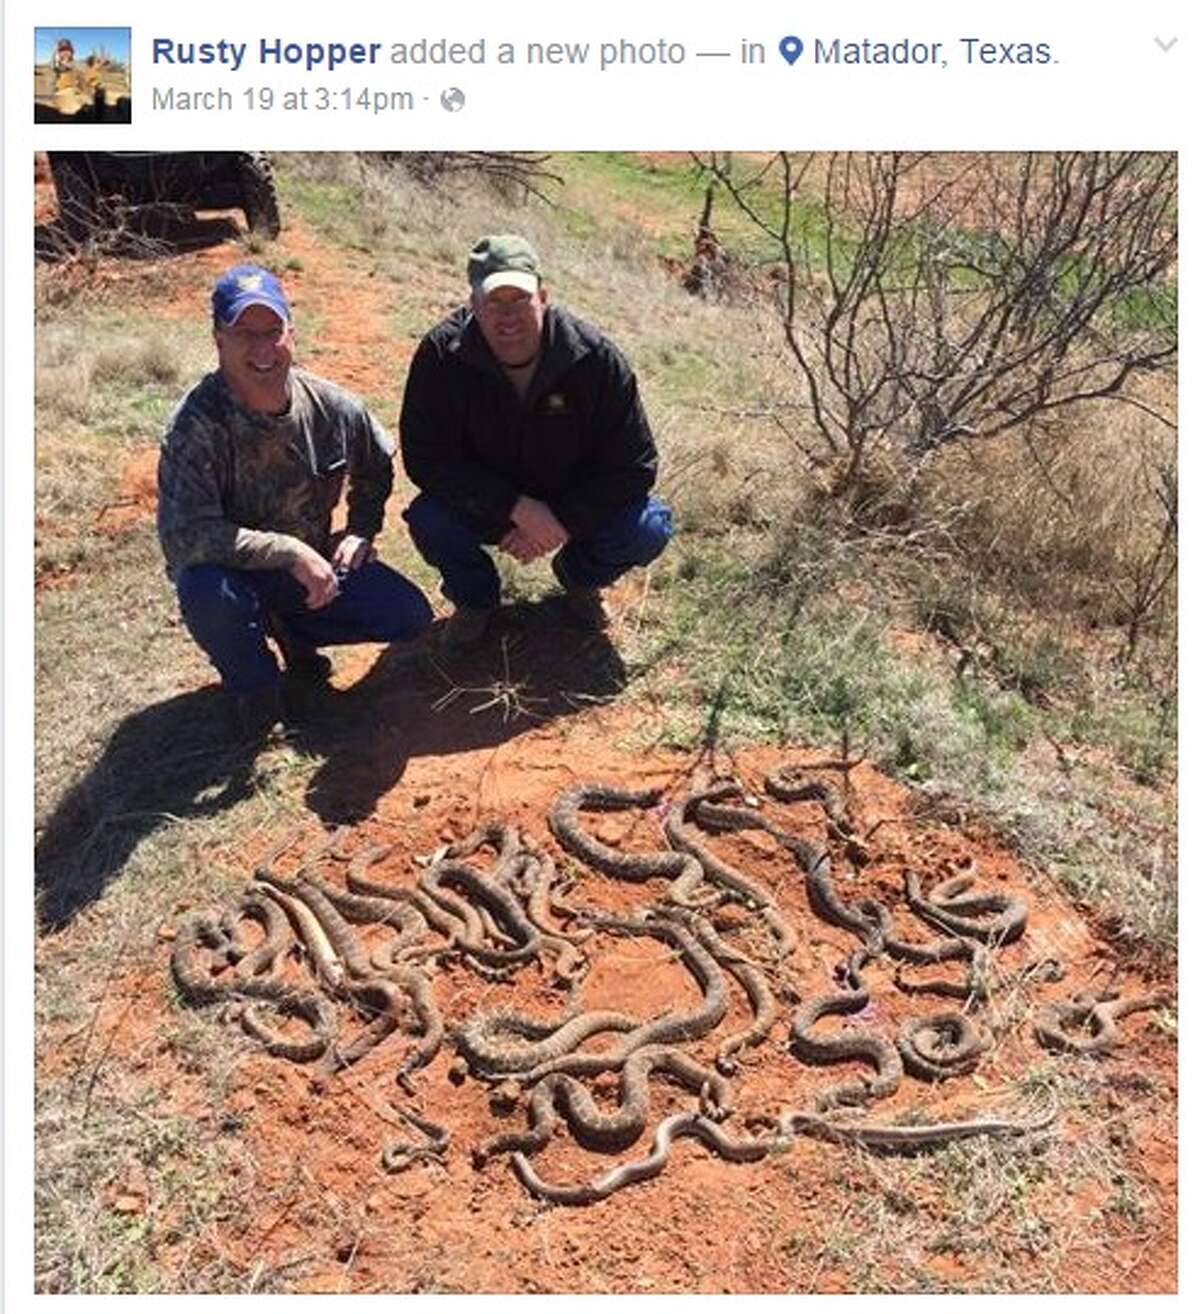 A group of North Texas hunters found a different kind of game when they discovered a nightmarish scene of nearly 30 slithering rattlesnakes hiding beneath a deer blind.